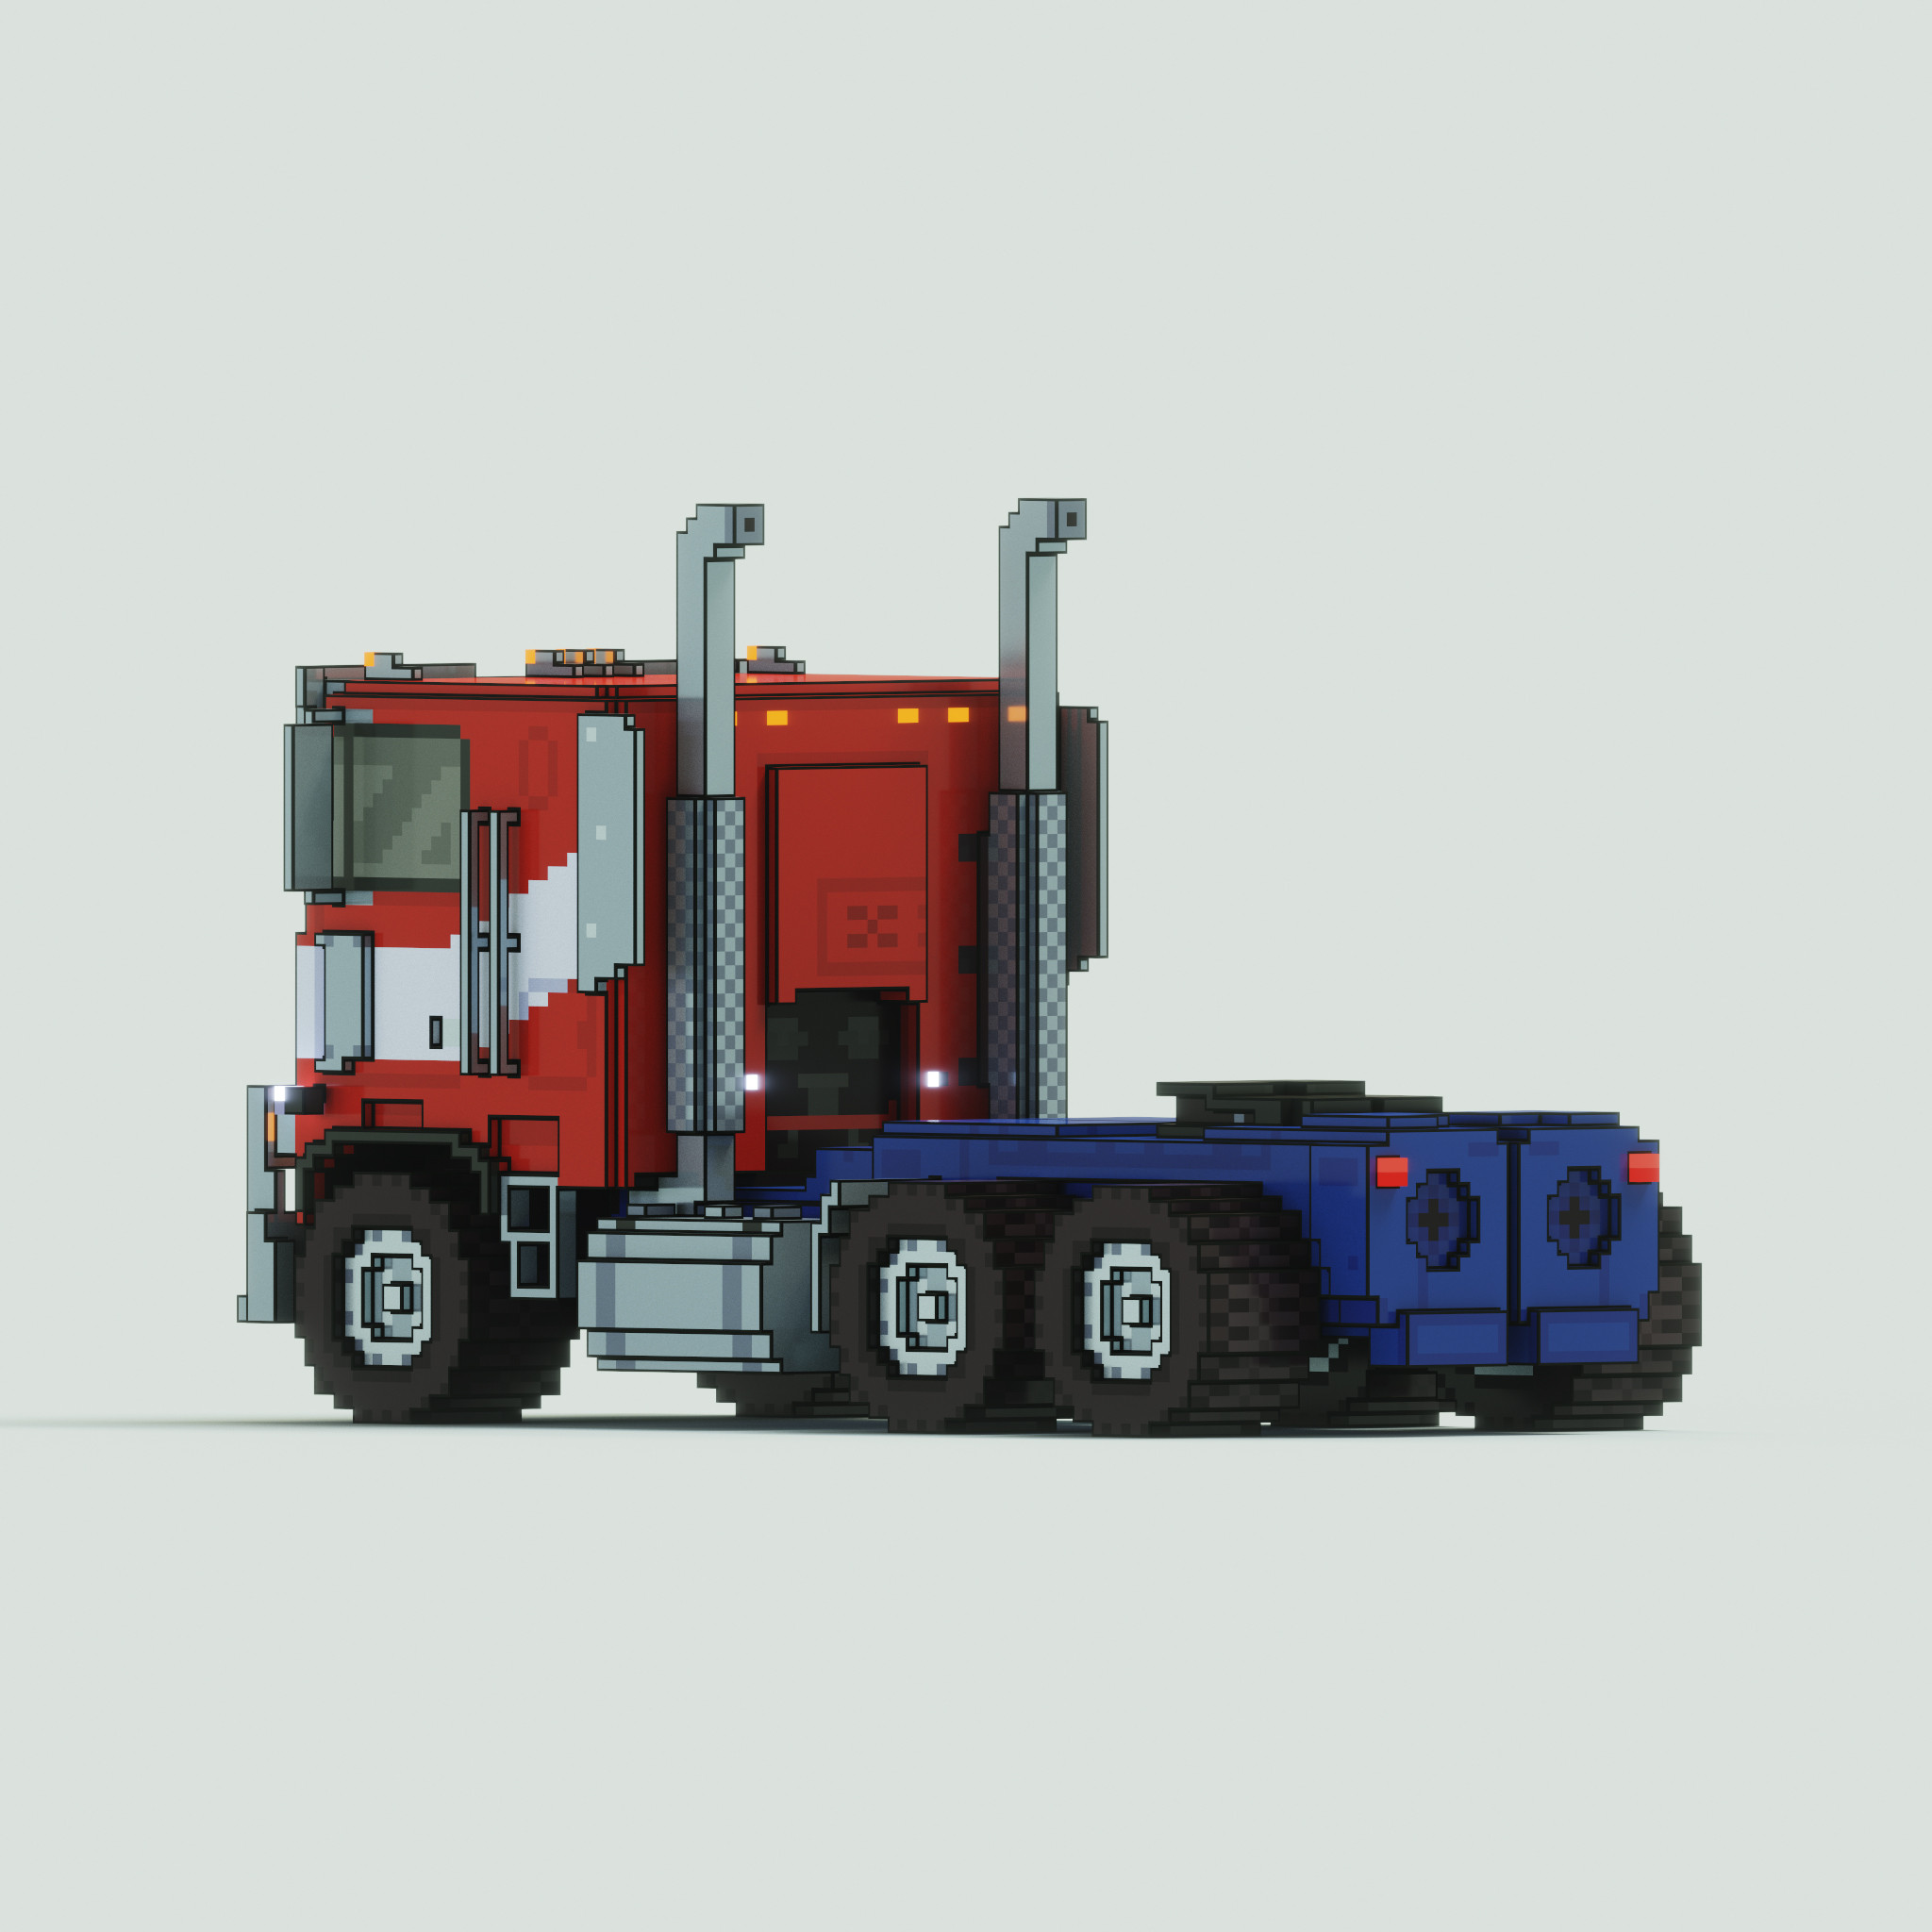 Rearward-facing side angle of Optimus Prime in "vehicle mode".